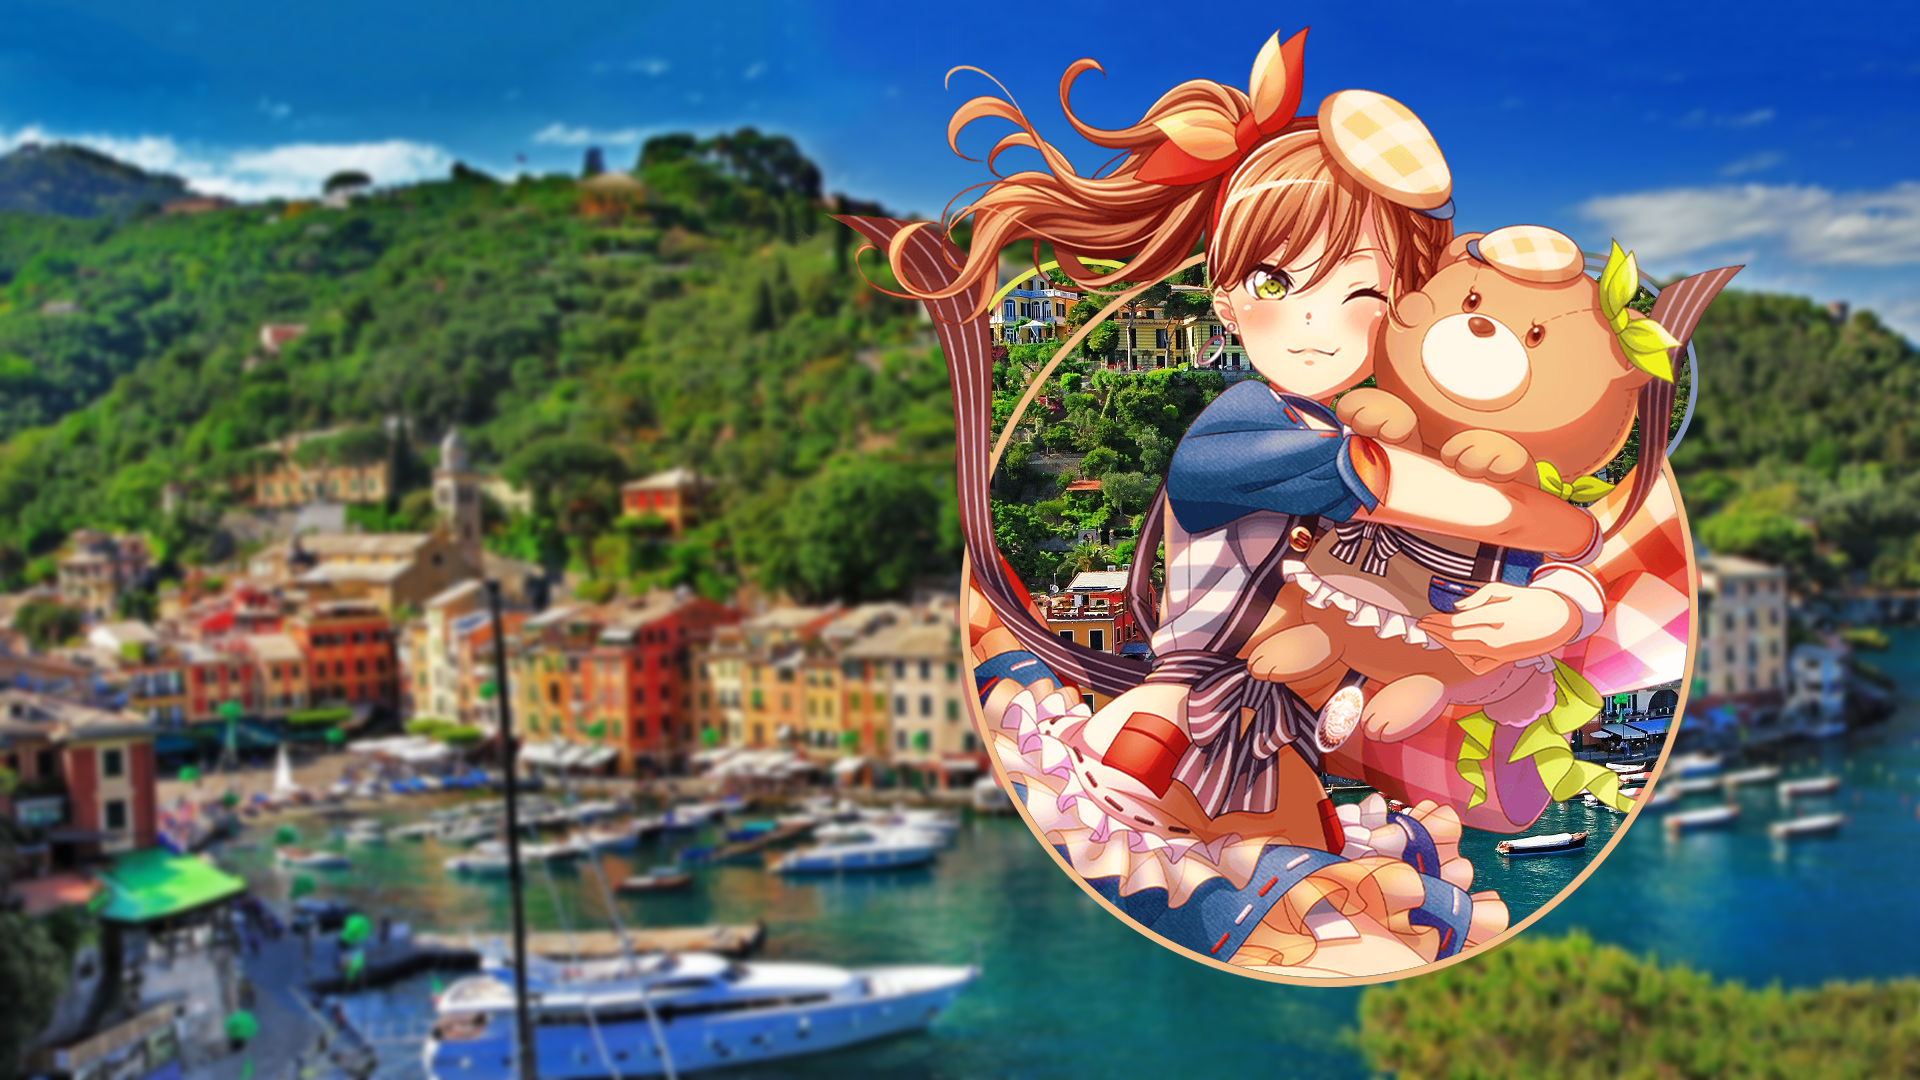 BanG Dream Imai Lisa Stuffed Animal Boat City Picture In Picture 1920x1080